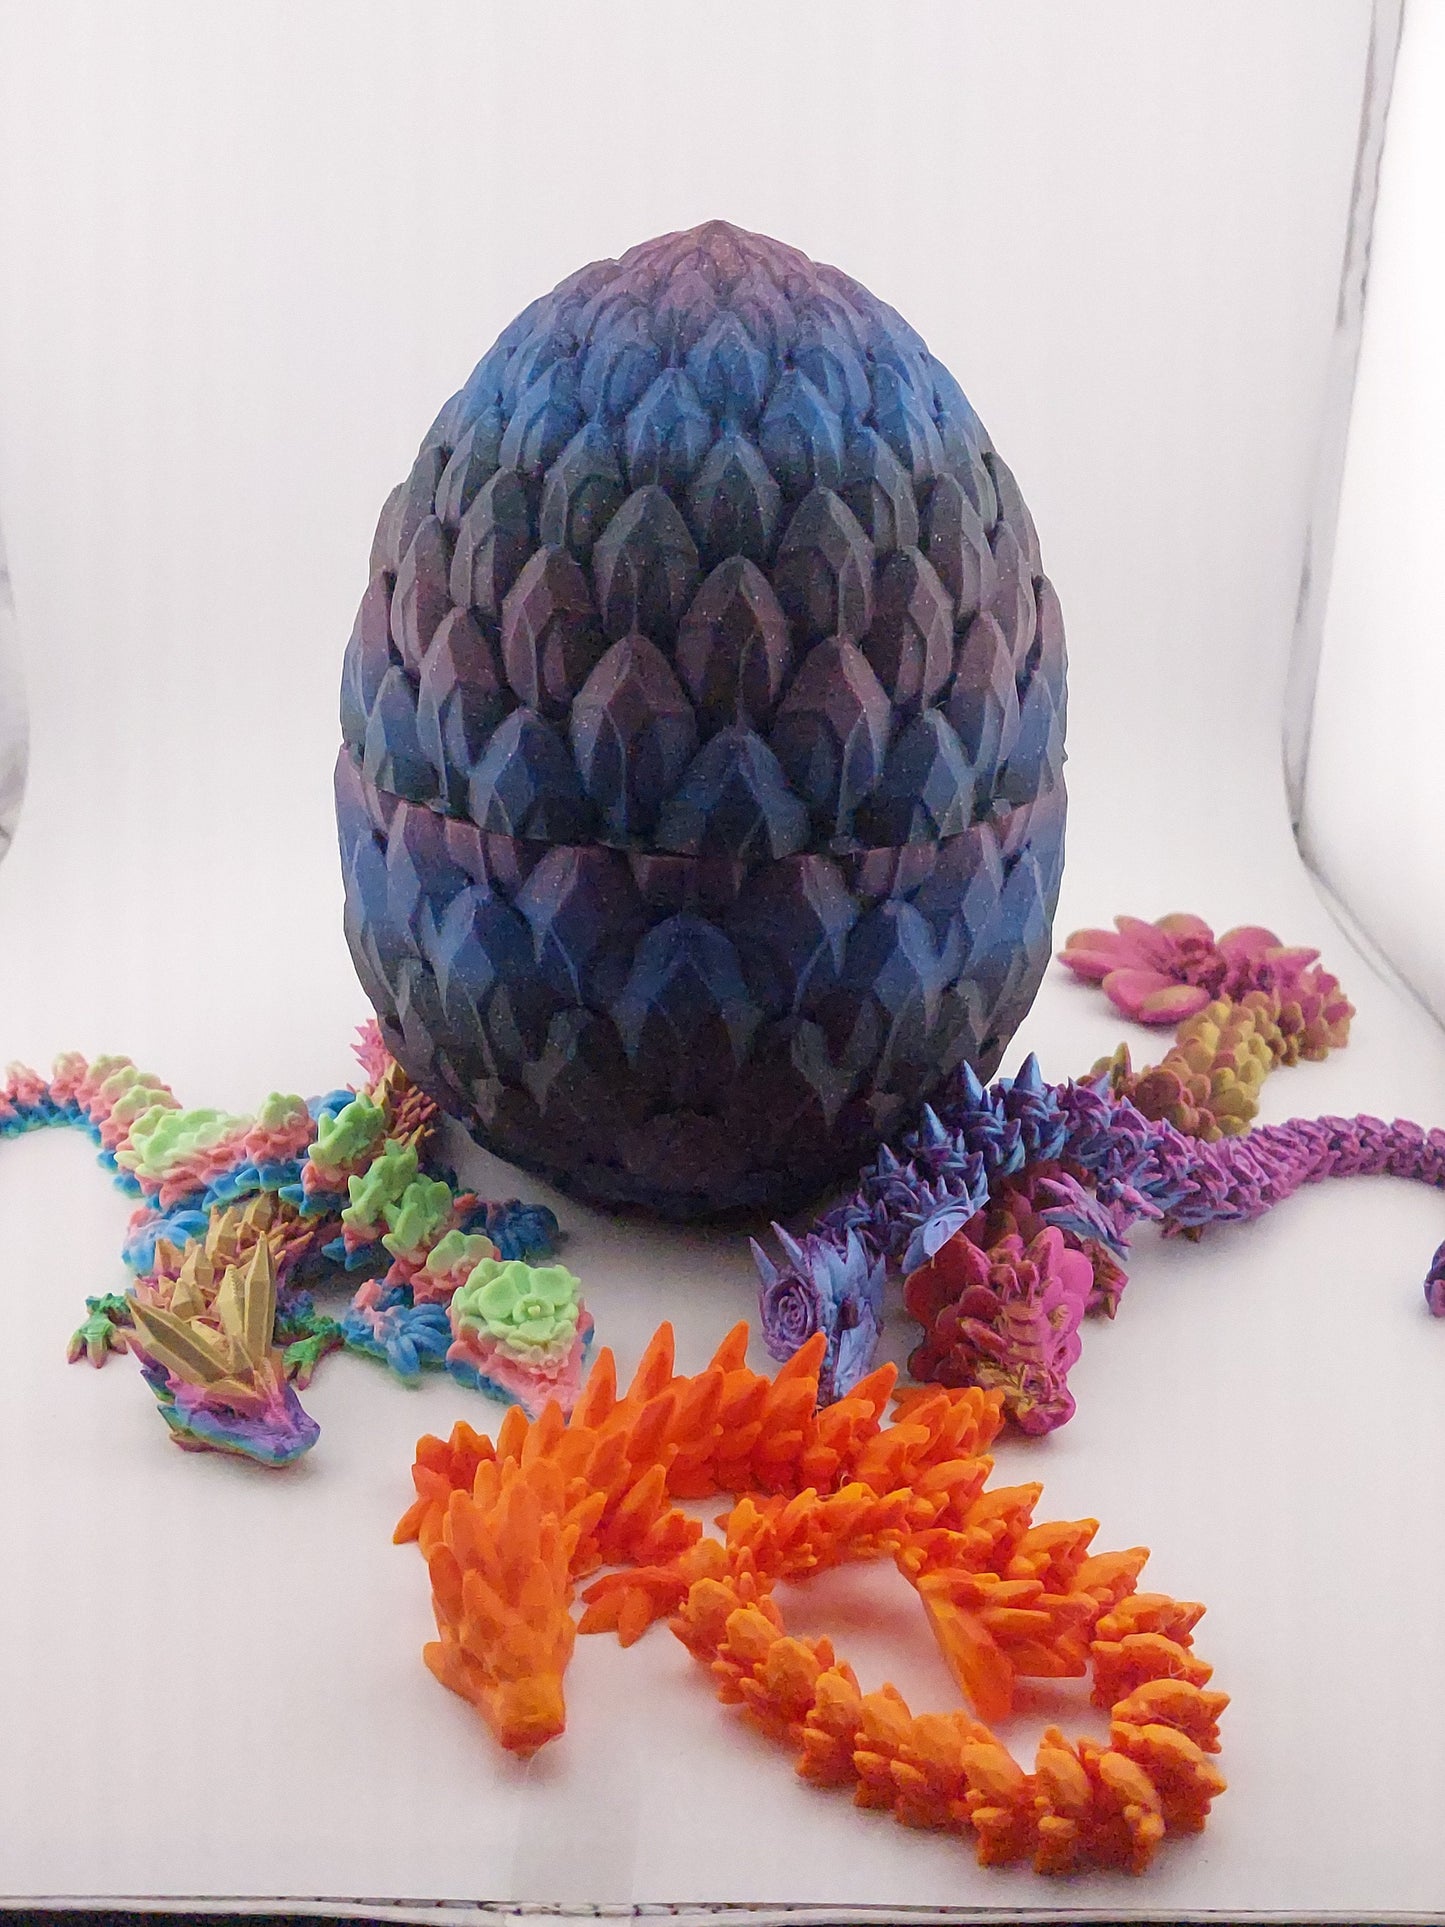 12 Inch 8 Styles of Dragons And Matching Egg! - Sensory Stress Fidget - Articulated - Cinderwing3d - 3D Printed Dragon - Unique Gift